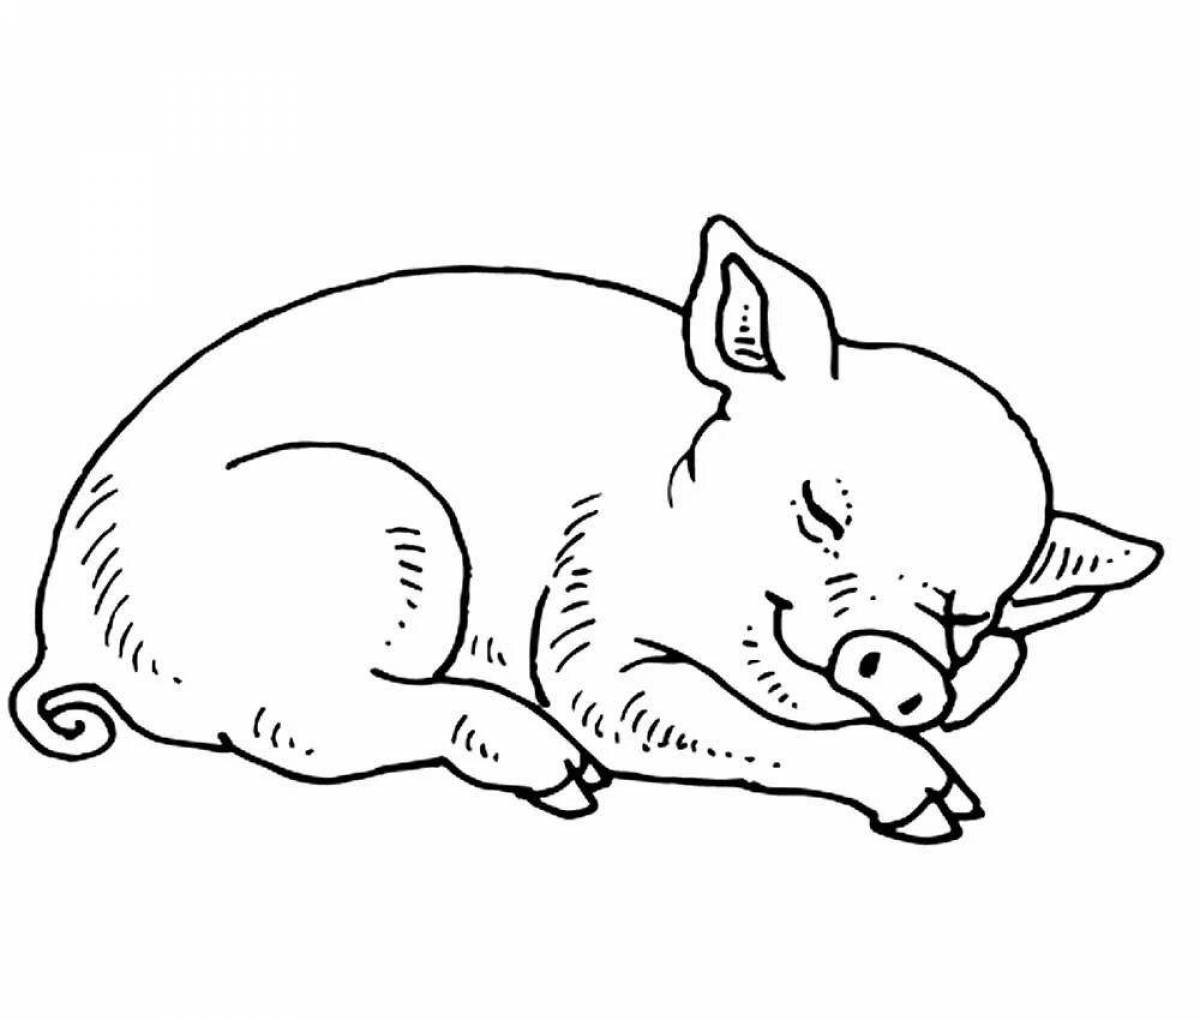 Silly pig coloring book for kids